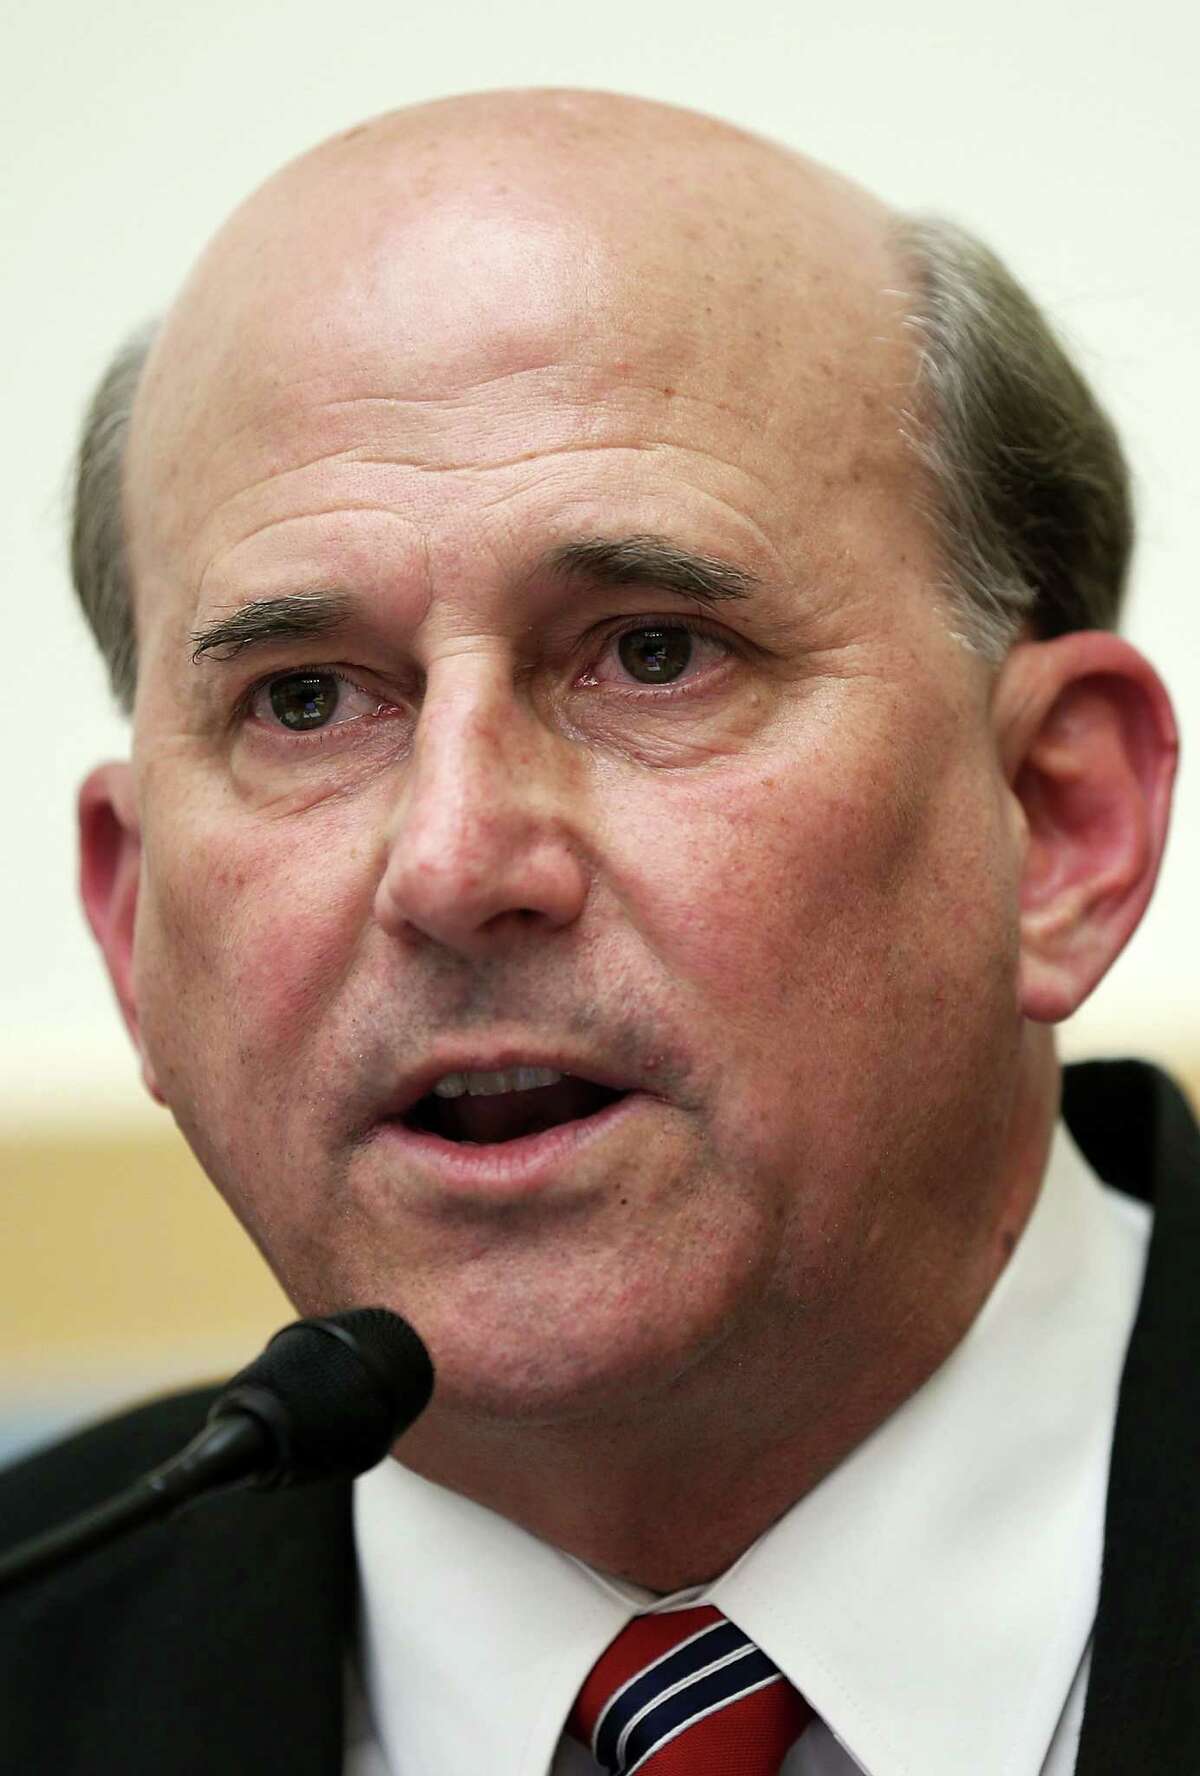 U.S. Rep. Louie Gohmert (R-TX) let loose with a blast about a man charged with shooting and killing five people in a Washington state mall, Hillary Clinton and refugees voting. Much of what Gohmert said in a Sept. 29, 2016, interview had no basis in fact. Click through to see more about Gohmert and the things he says and does.